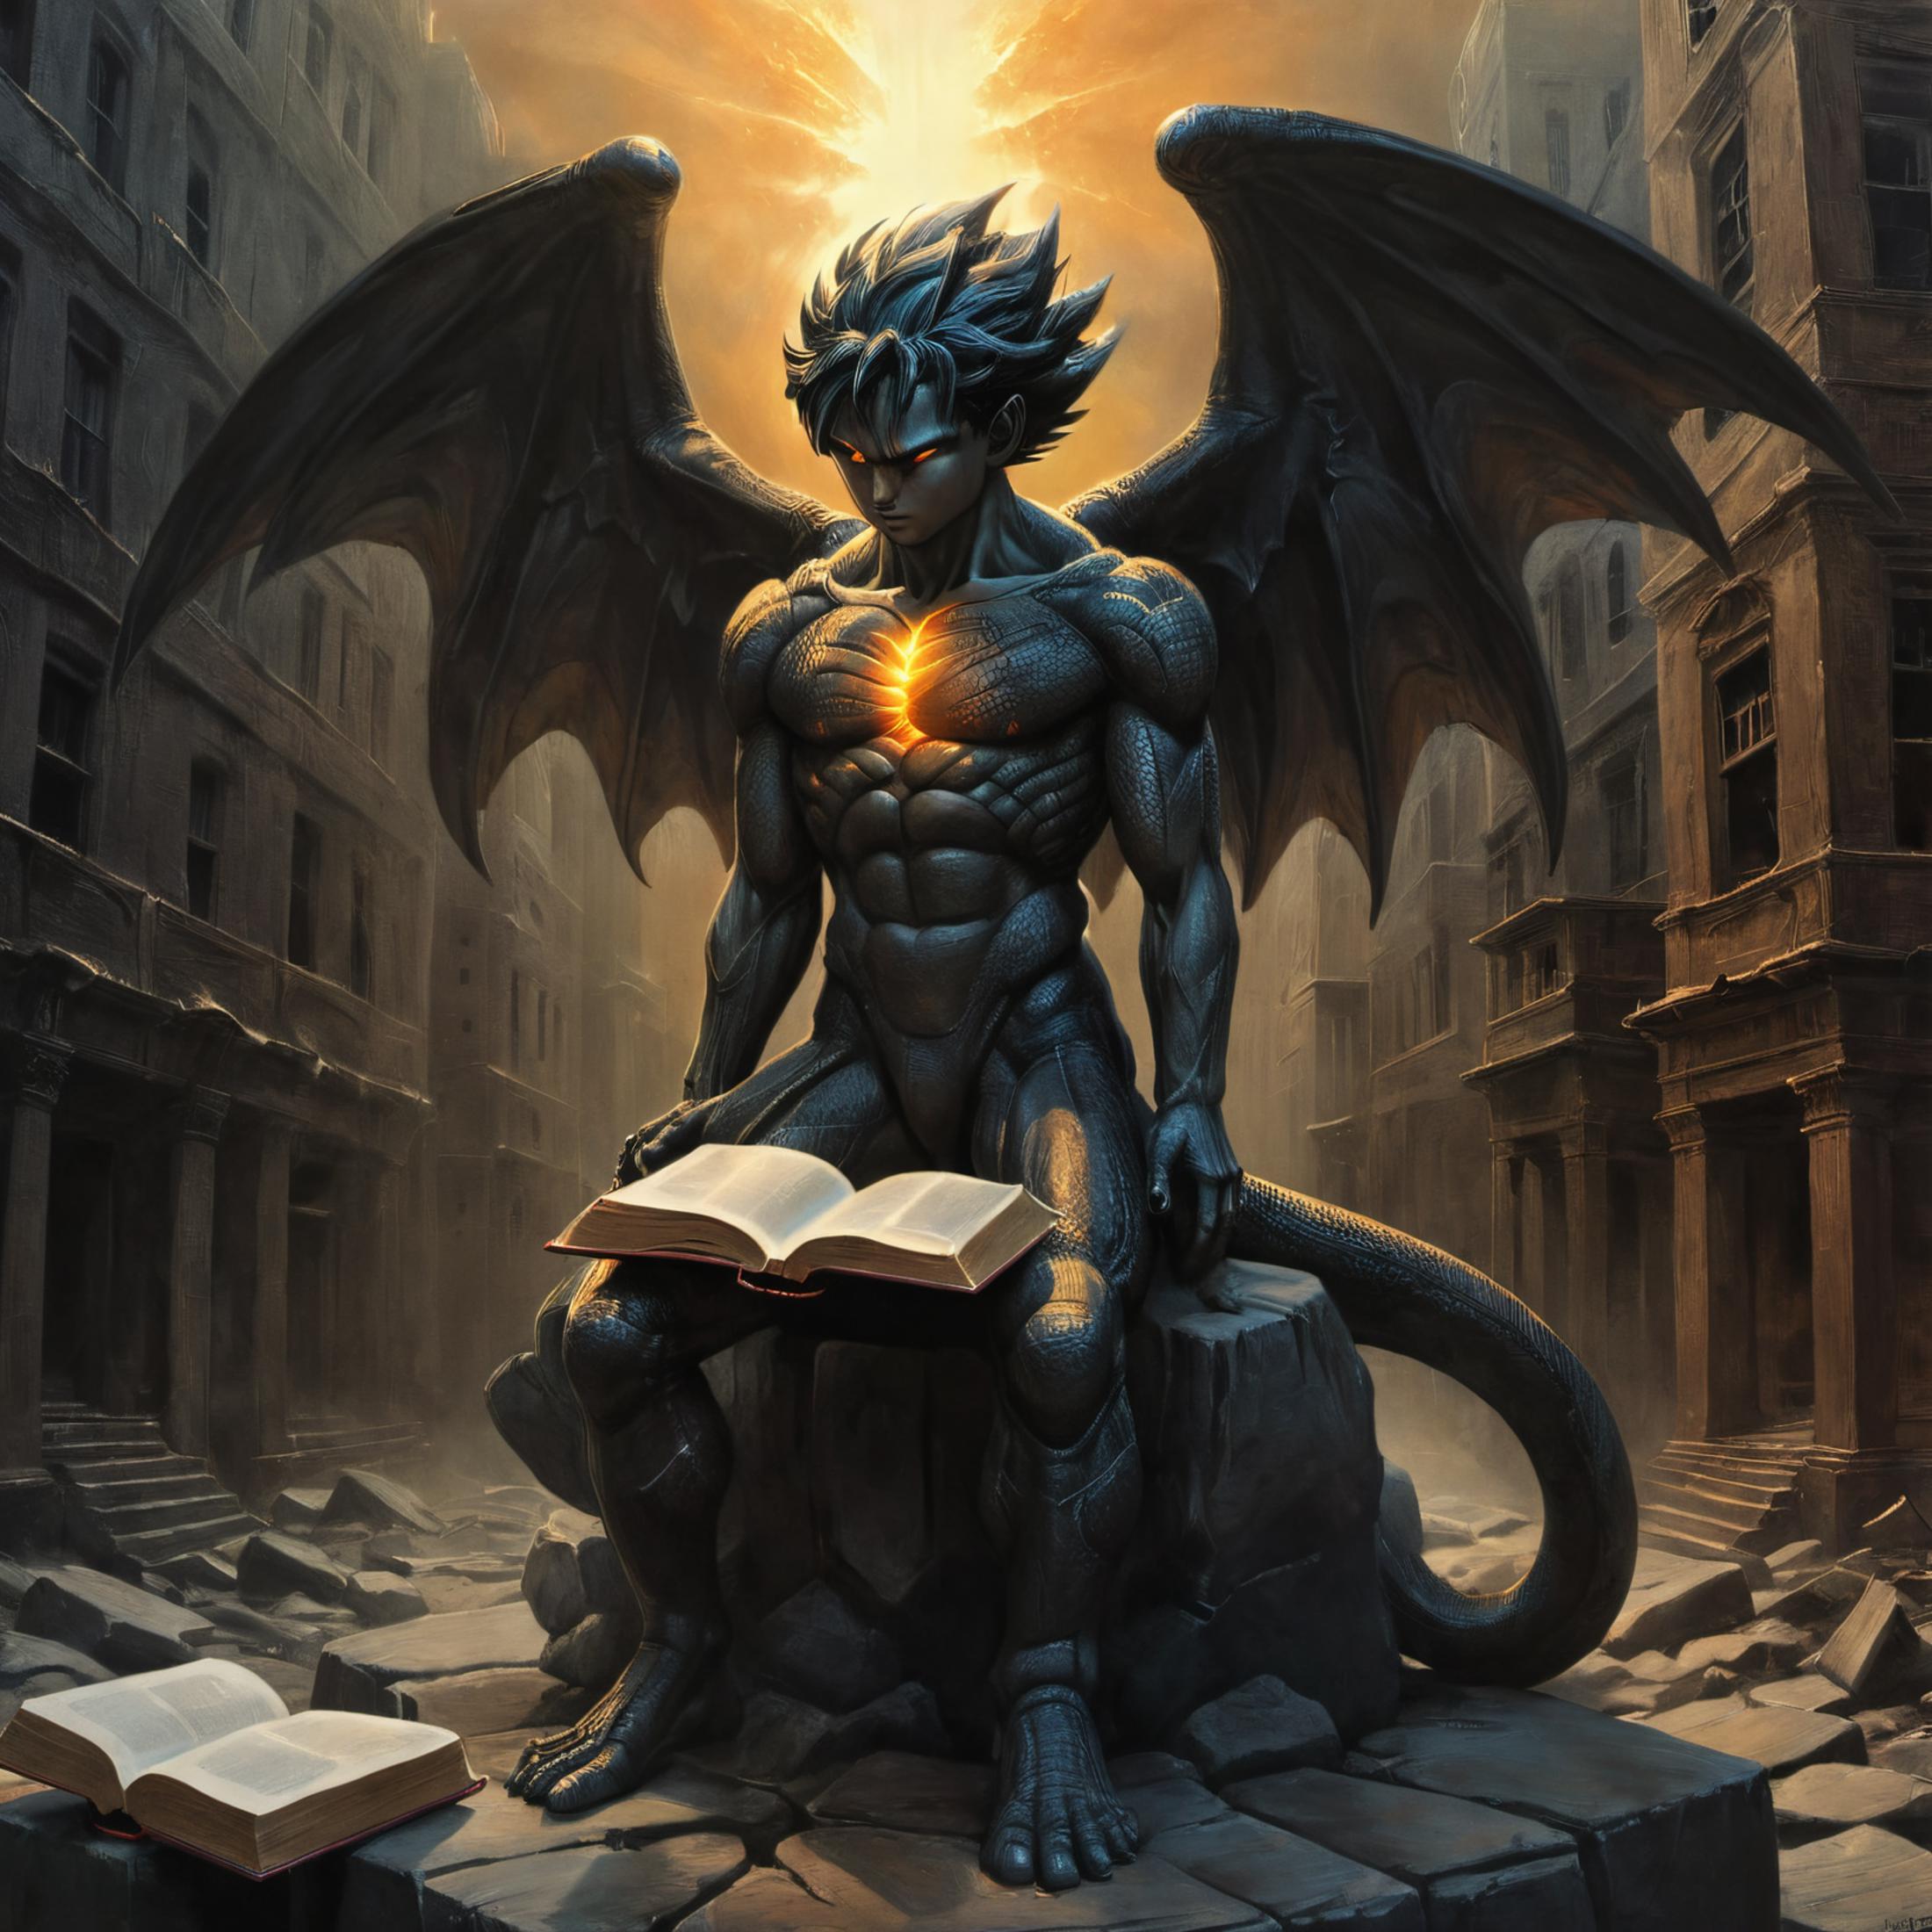 Anime Dragon-Man reading a book in a ruined city.